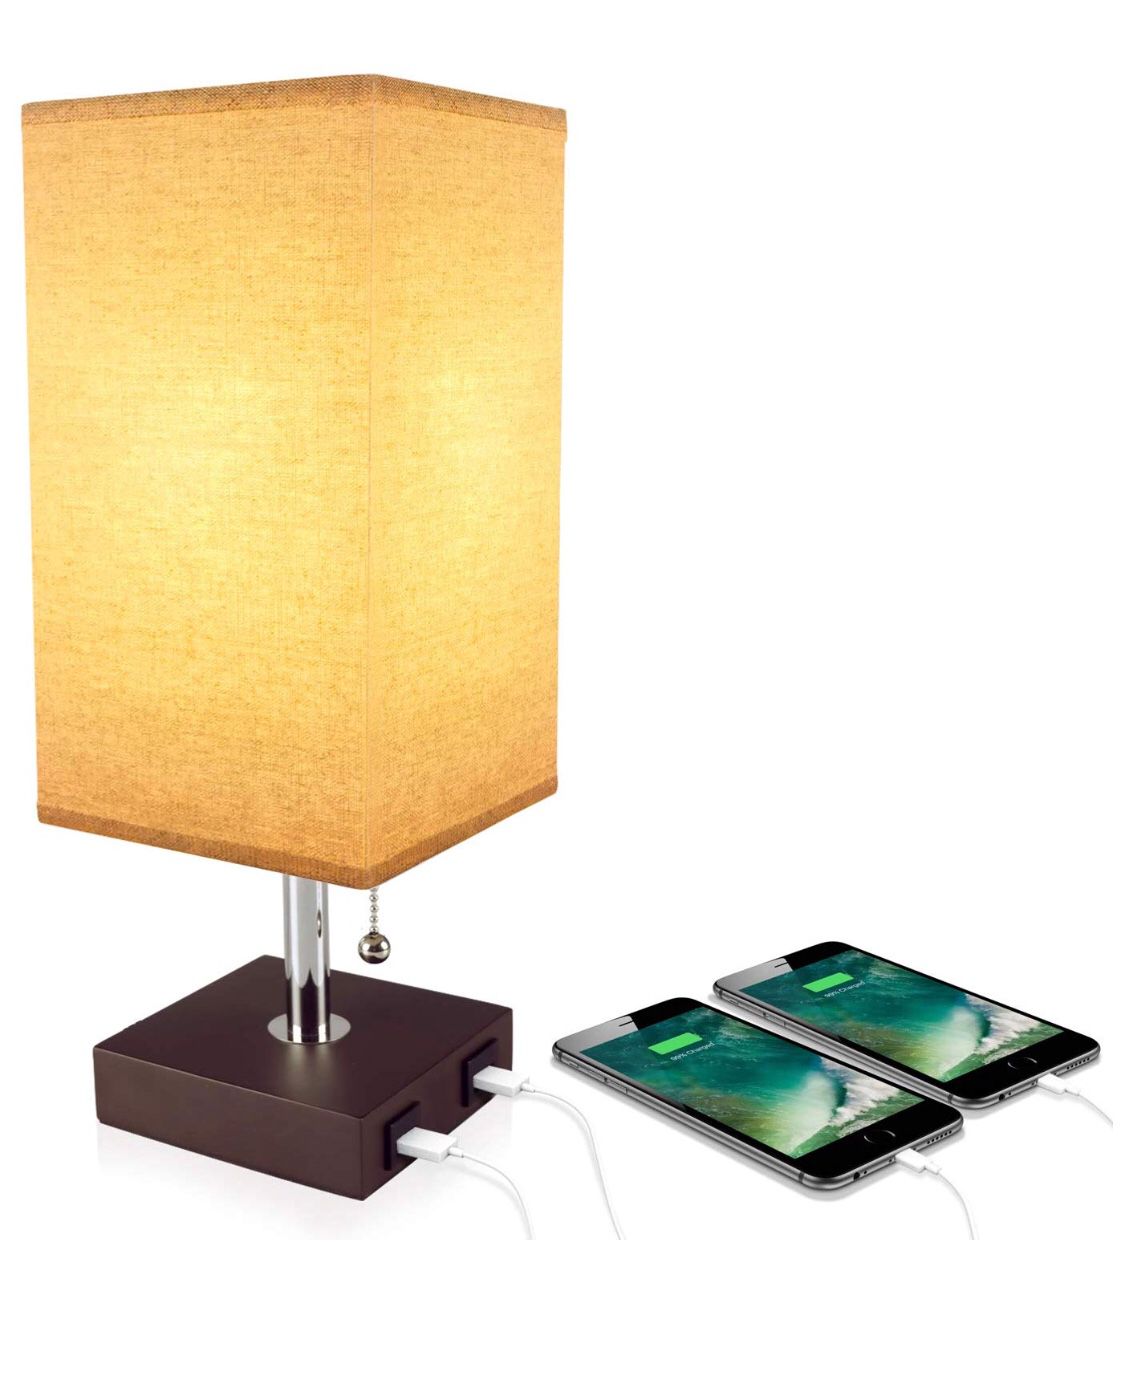 USB Table Desk Lamp, Acaxin Bedside Lamp with Dual USB Quick Charge Port, Wood Desk Lamp